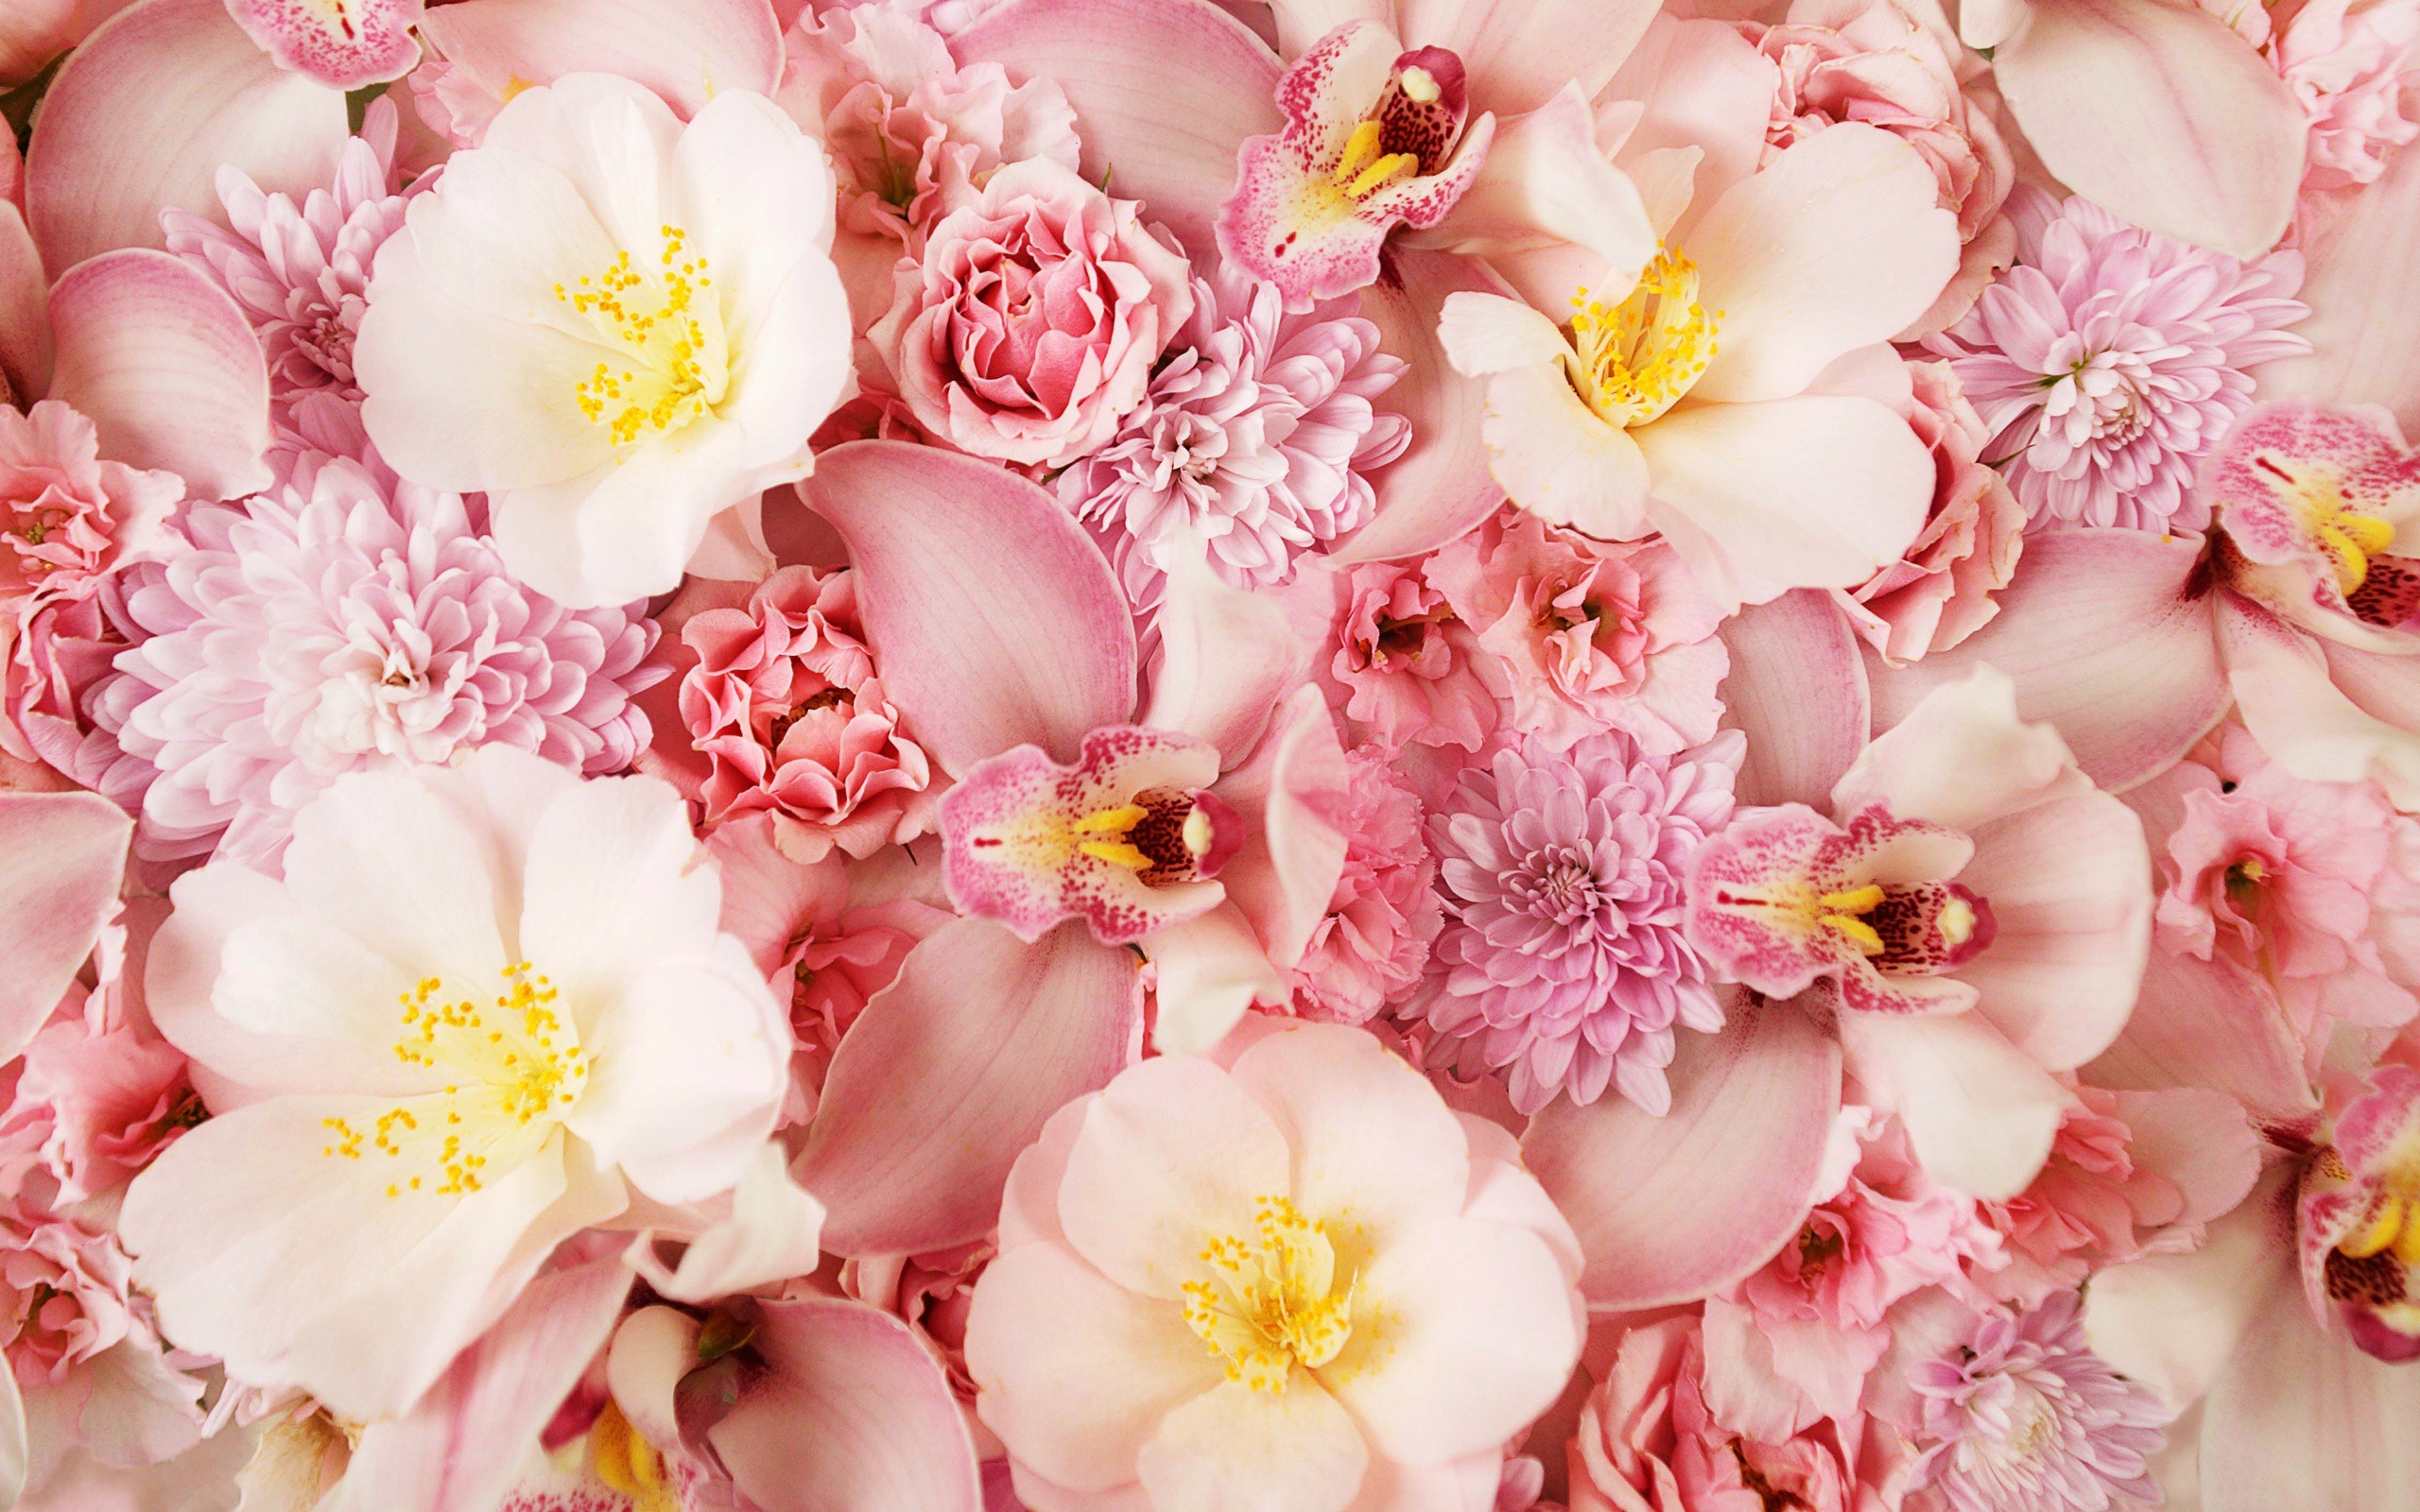 earth, flower, nature, orchid, peony, pink flower, flowers